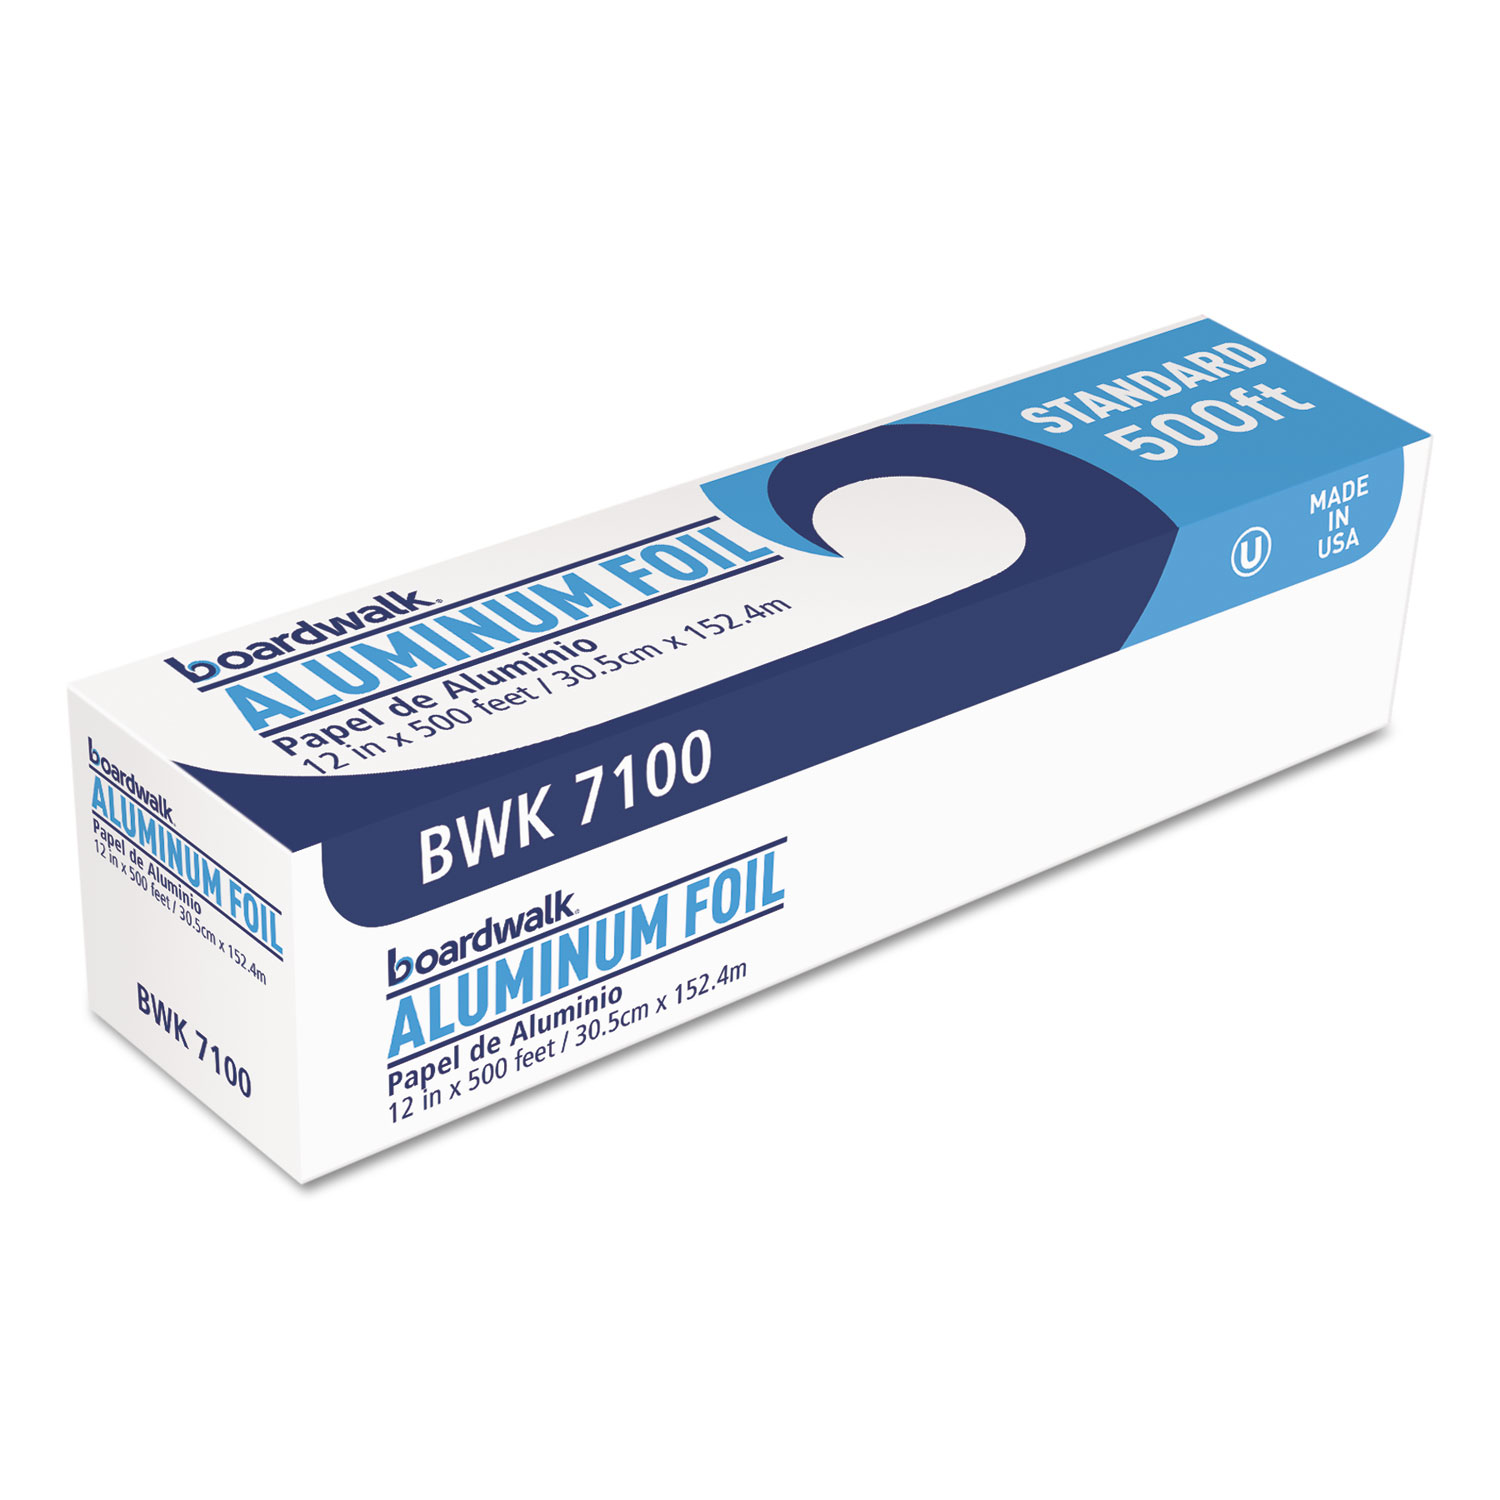 Standard Aluminum Foil Roll, 12 x 500ft, 14 Micron Thickness, Silver